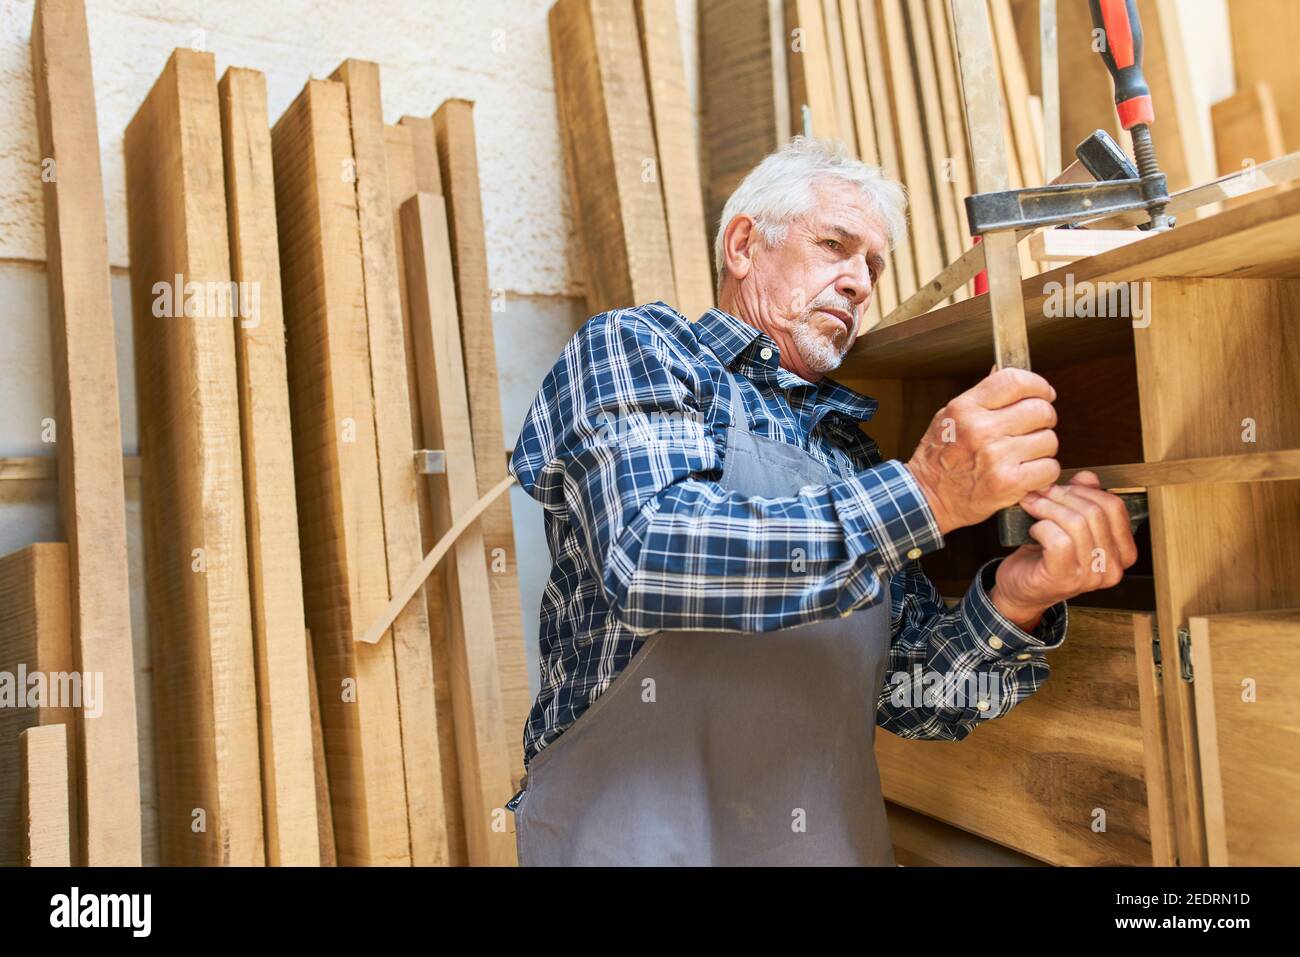 Older craftsman as a cabinet maker attaches screw clamp to a cabinet Stock Photo